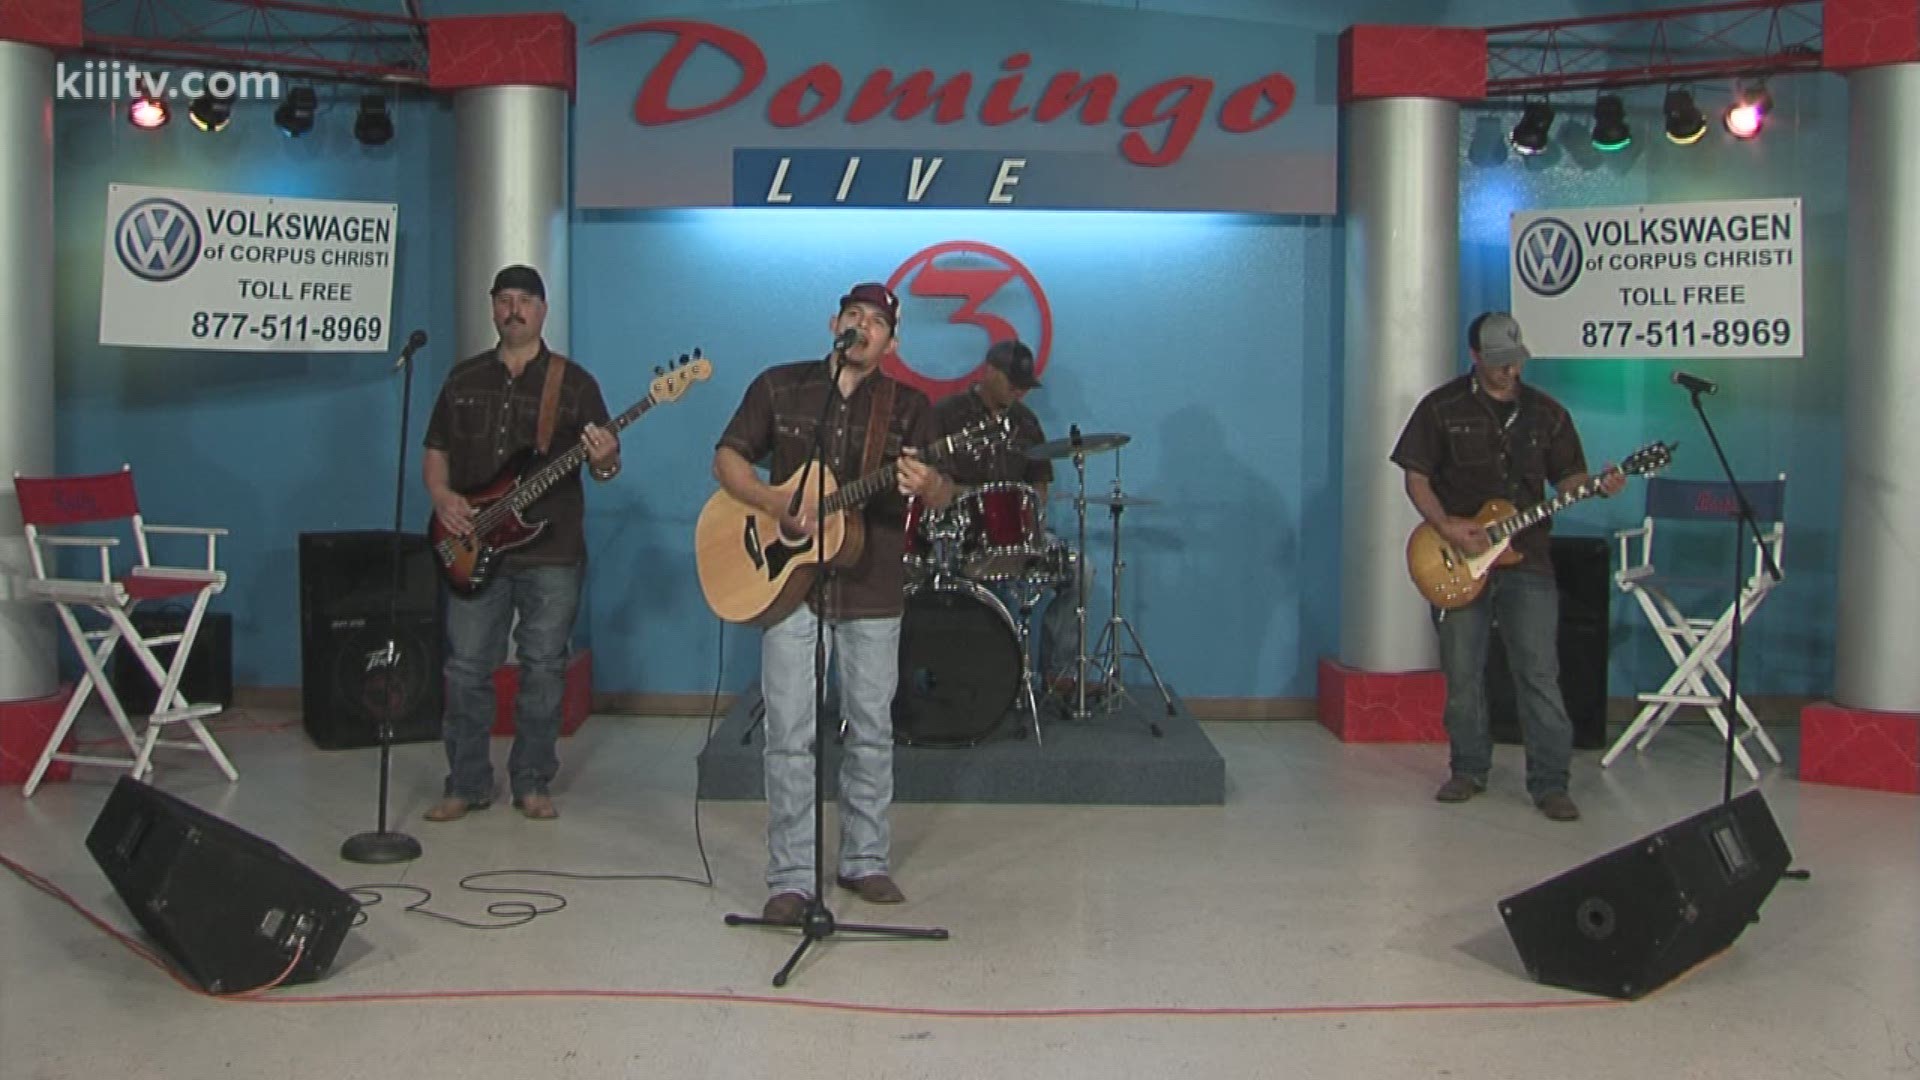 The Brush Country Band Performing "Sweet Southern Woman" on Domingo Live!